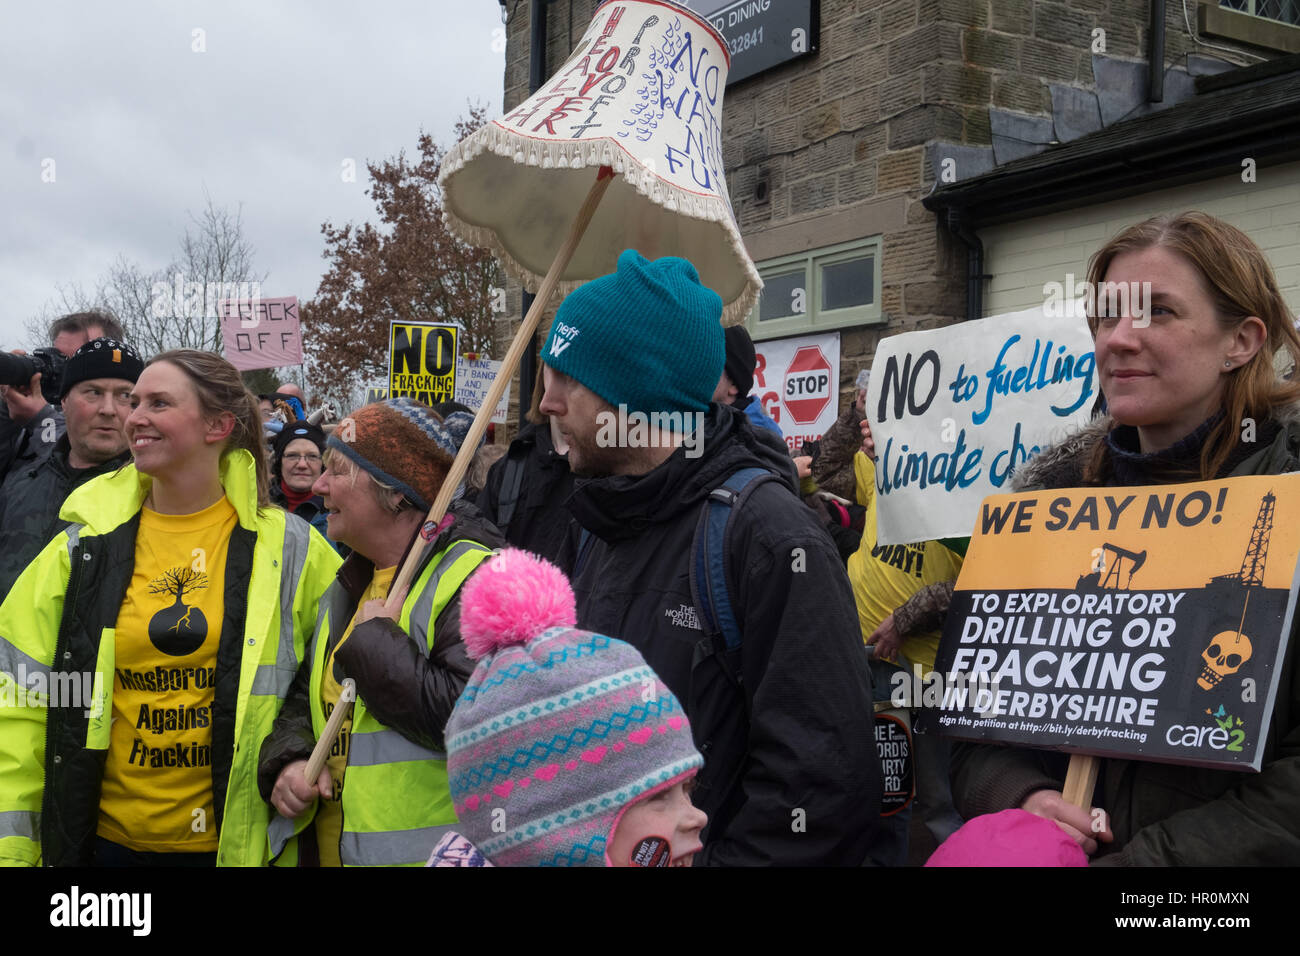 Eckington, UK. 25th Feb, 2017. Marsh Lane, Chesterfield, Derbyshire, UK, February 25th 2017, Peaceful demonstration against fracking by residents of a village who are opposed to proposals by INEOS to drill exploration wells in the nearby countryside. Credit: James Macfarlen/Alamy Live News Stock Photo